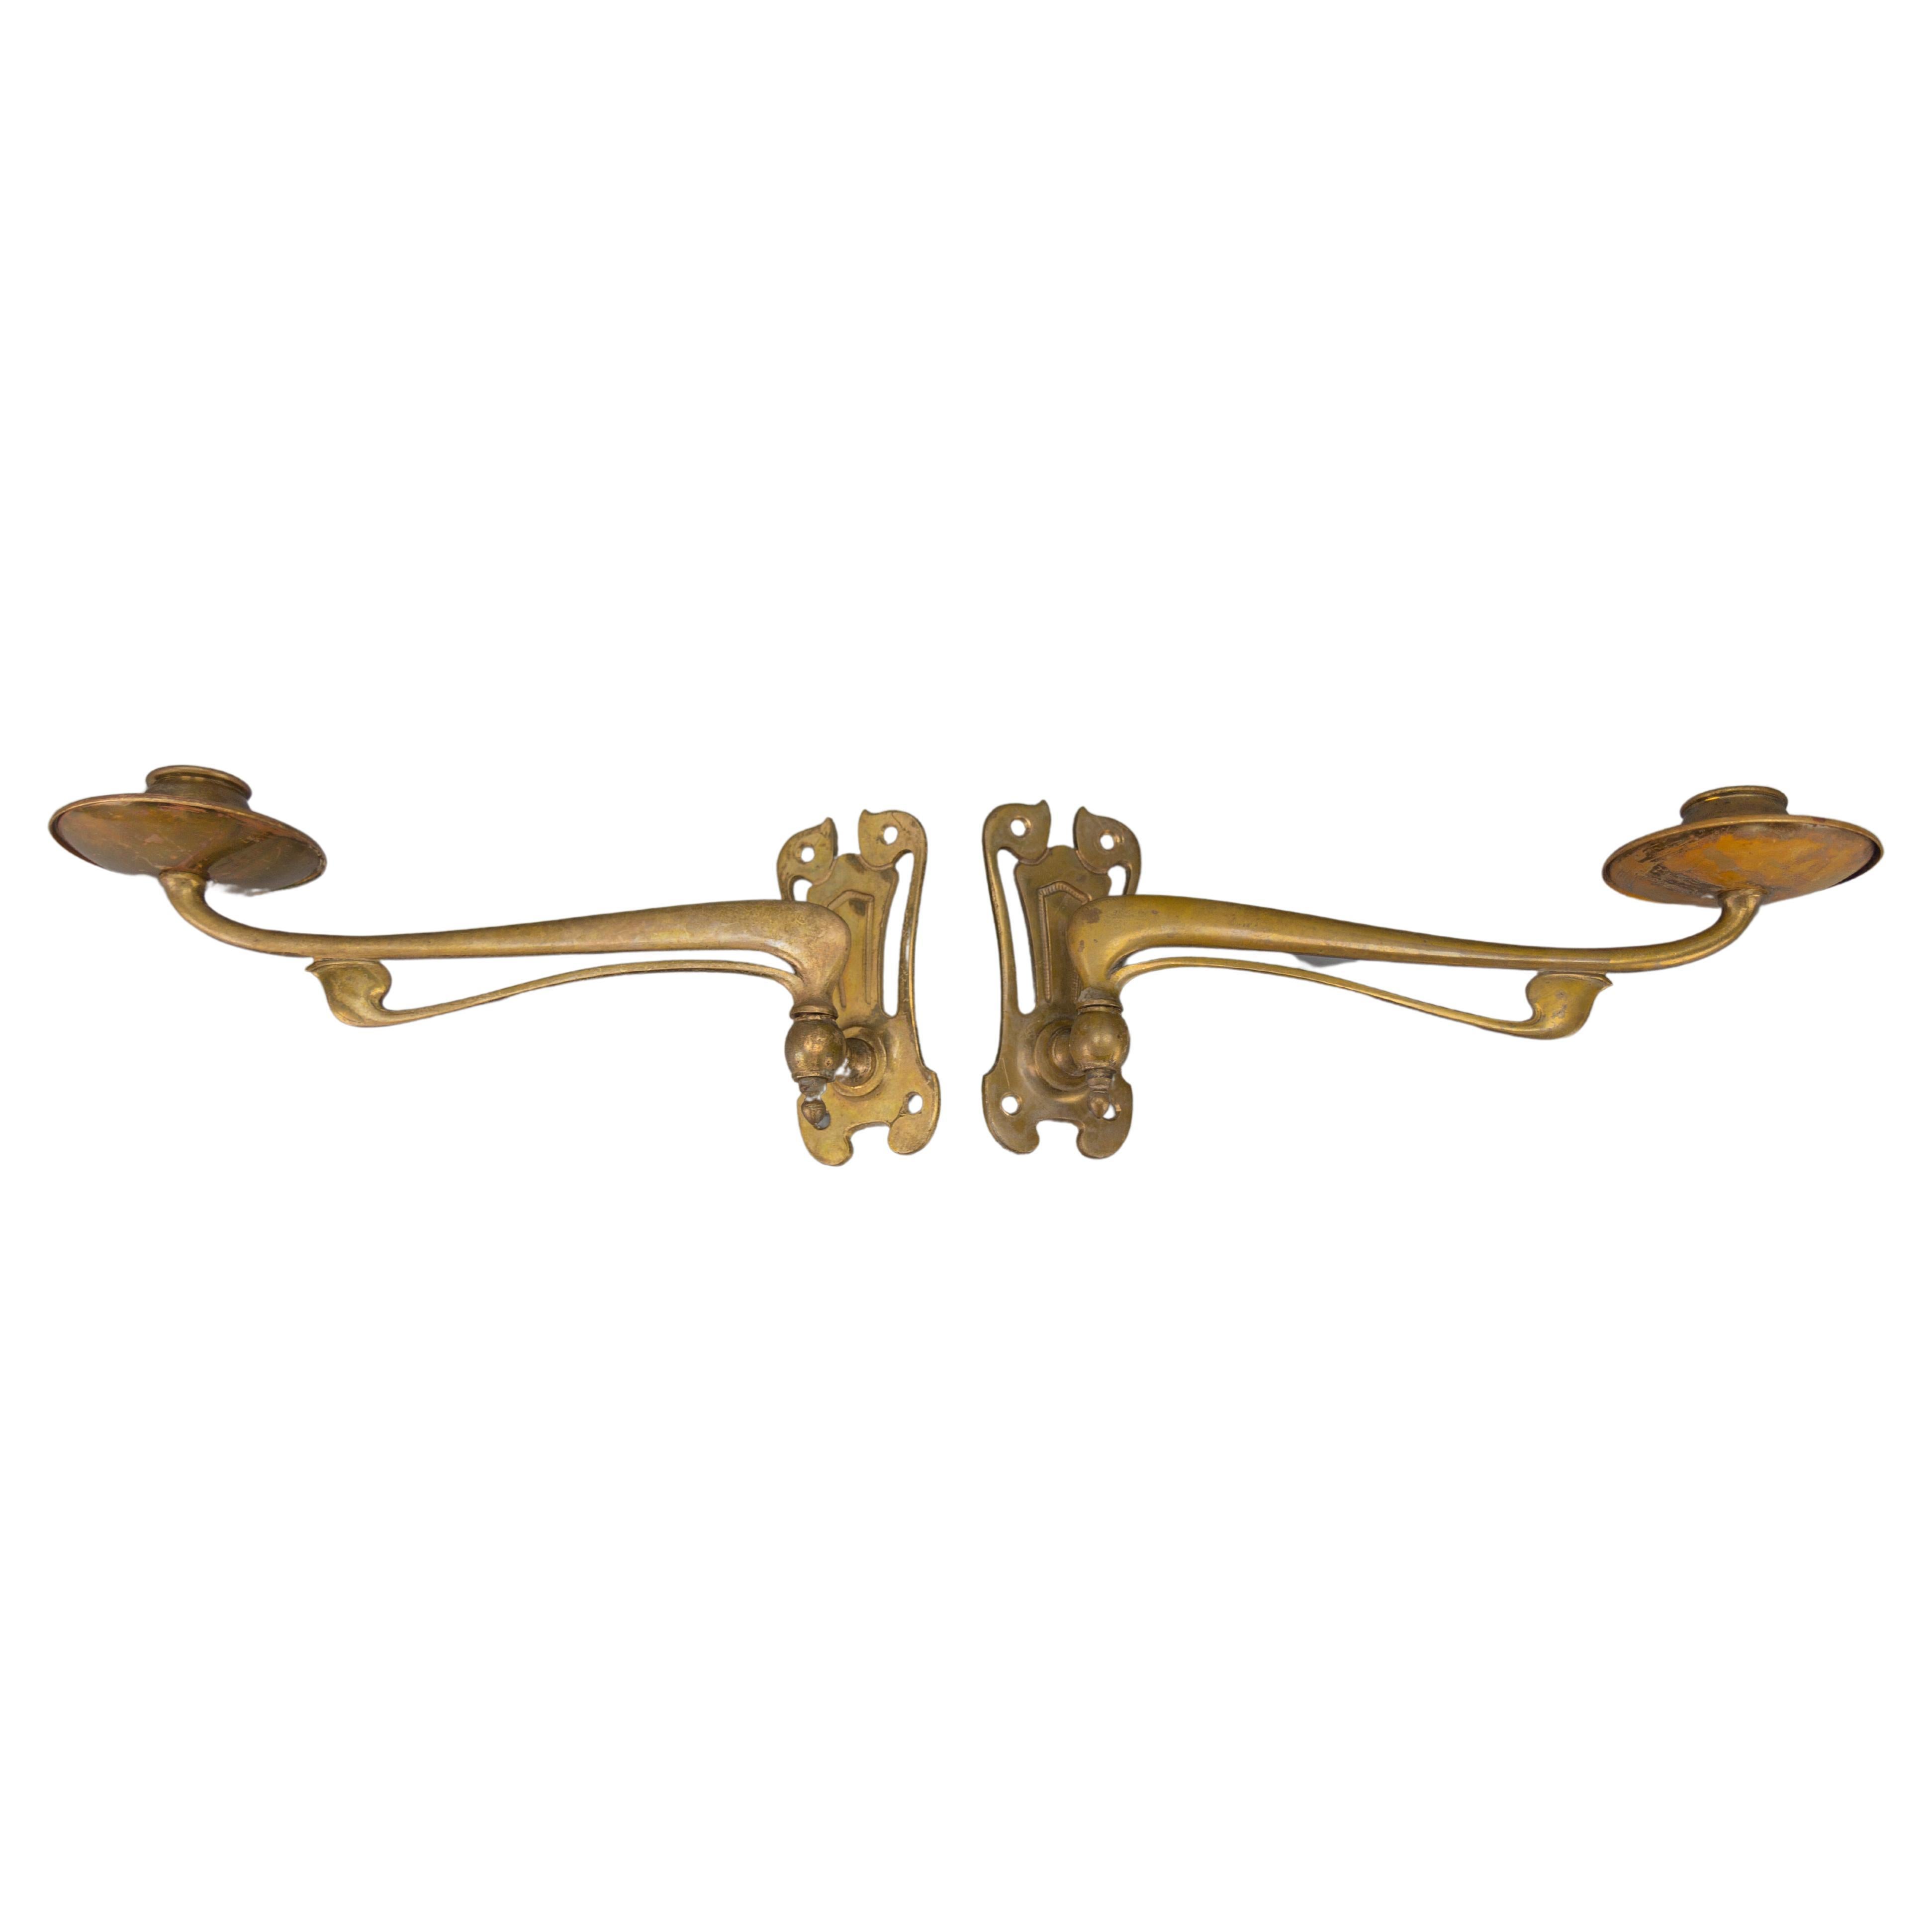 Pair of French Art Nouveau Brass Piano Wall Sconces Swivel Candle Holders, 1920 For Sale